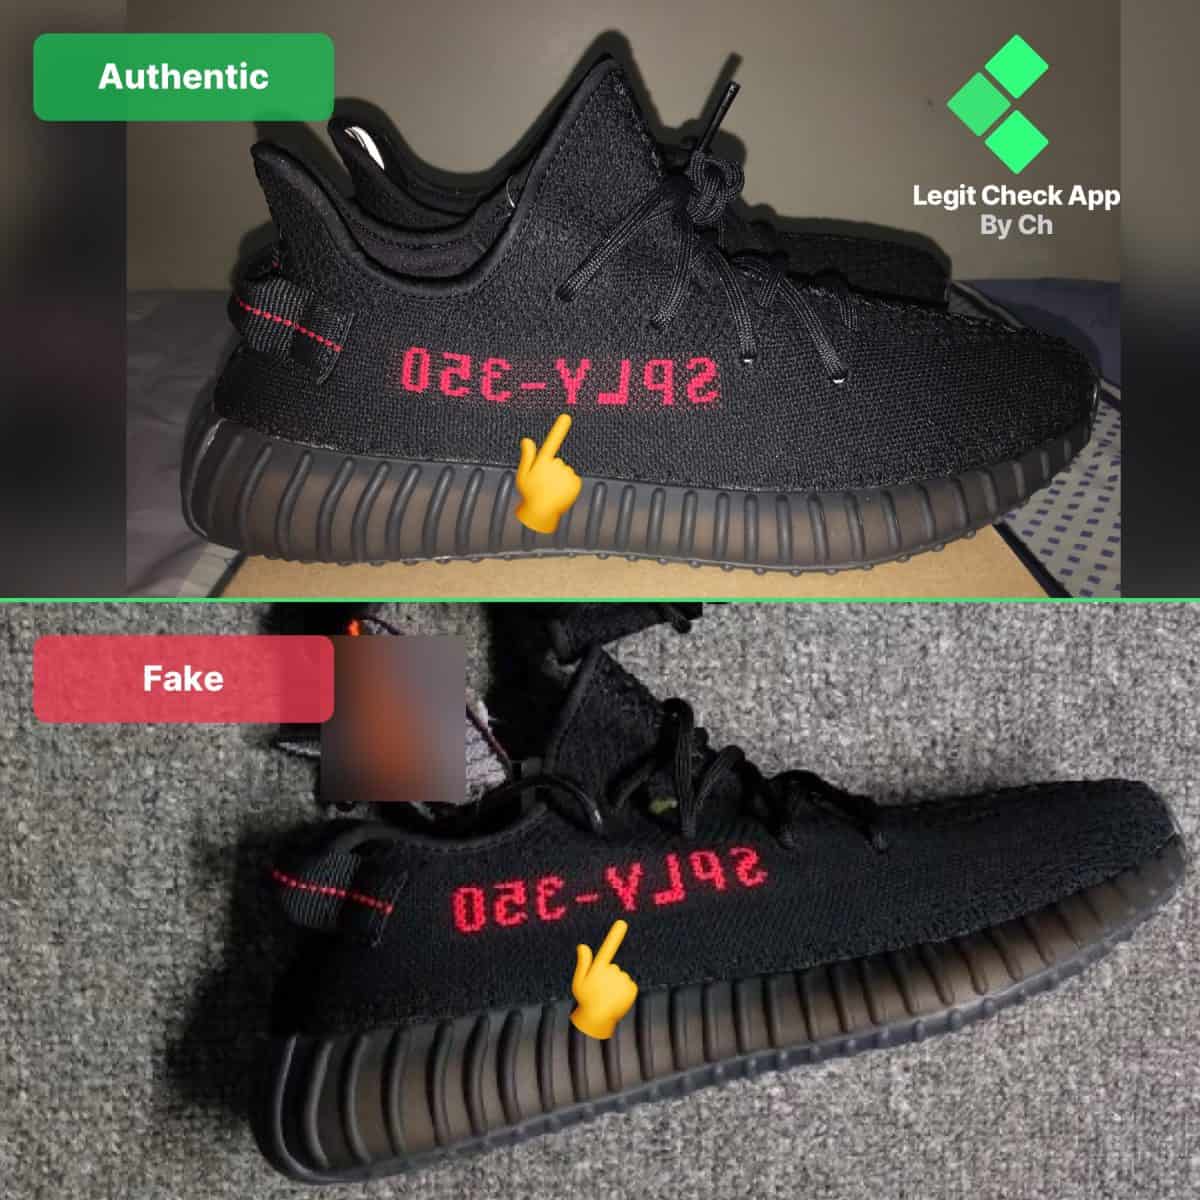 The Ultimate Real Vs Fake Yeezy Boost 350 V2 Bred (Black Red) Guide